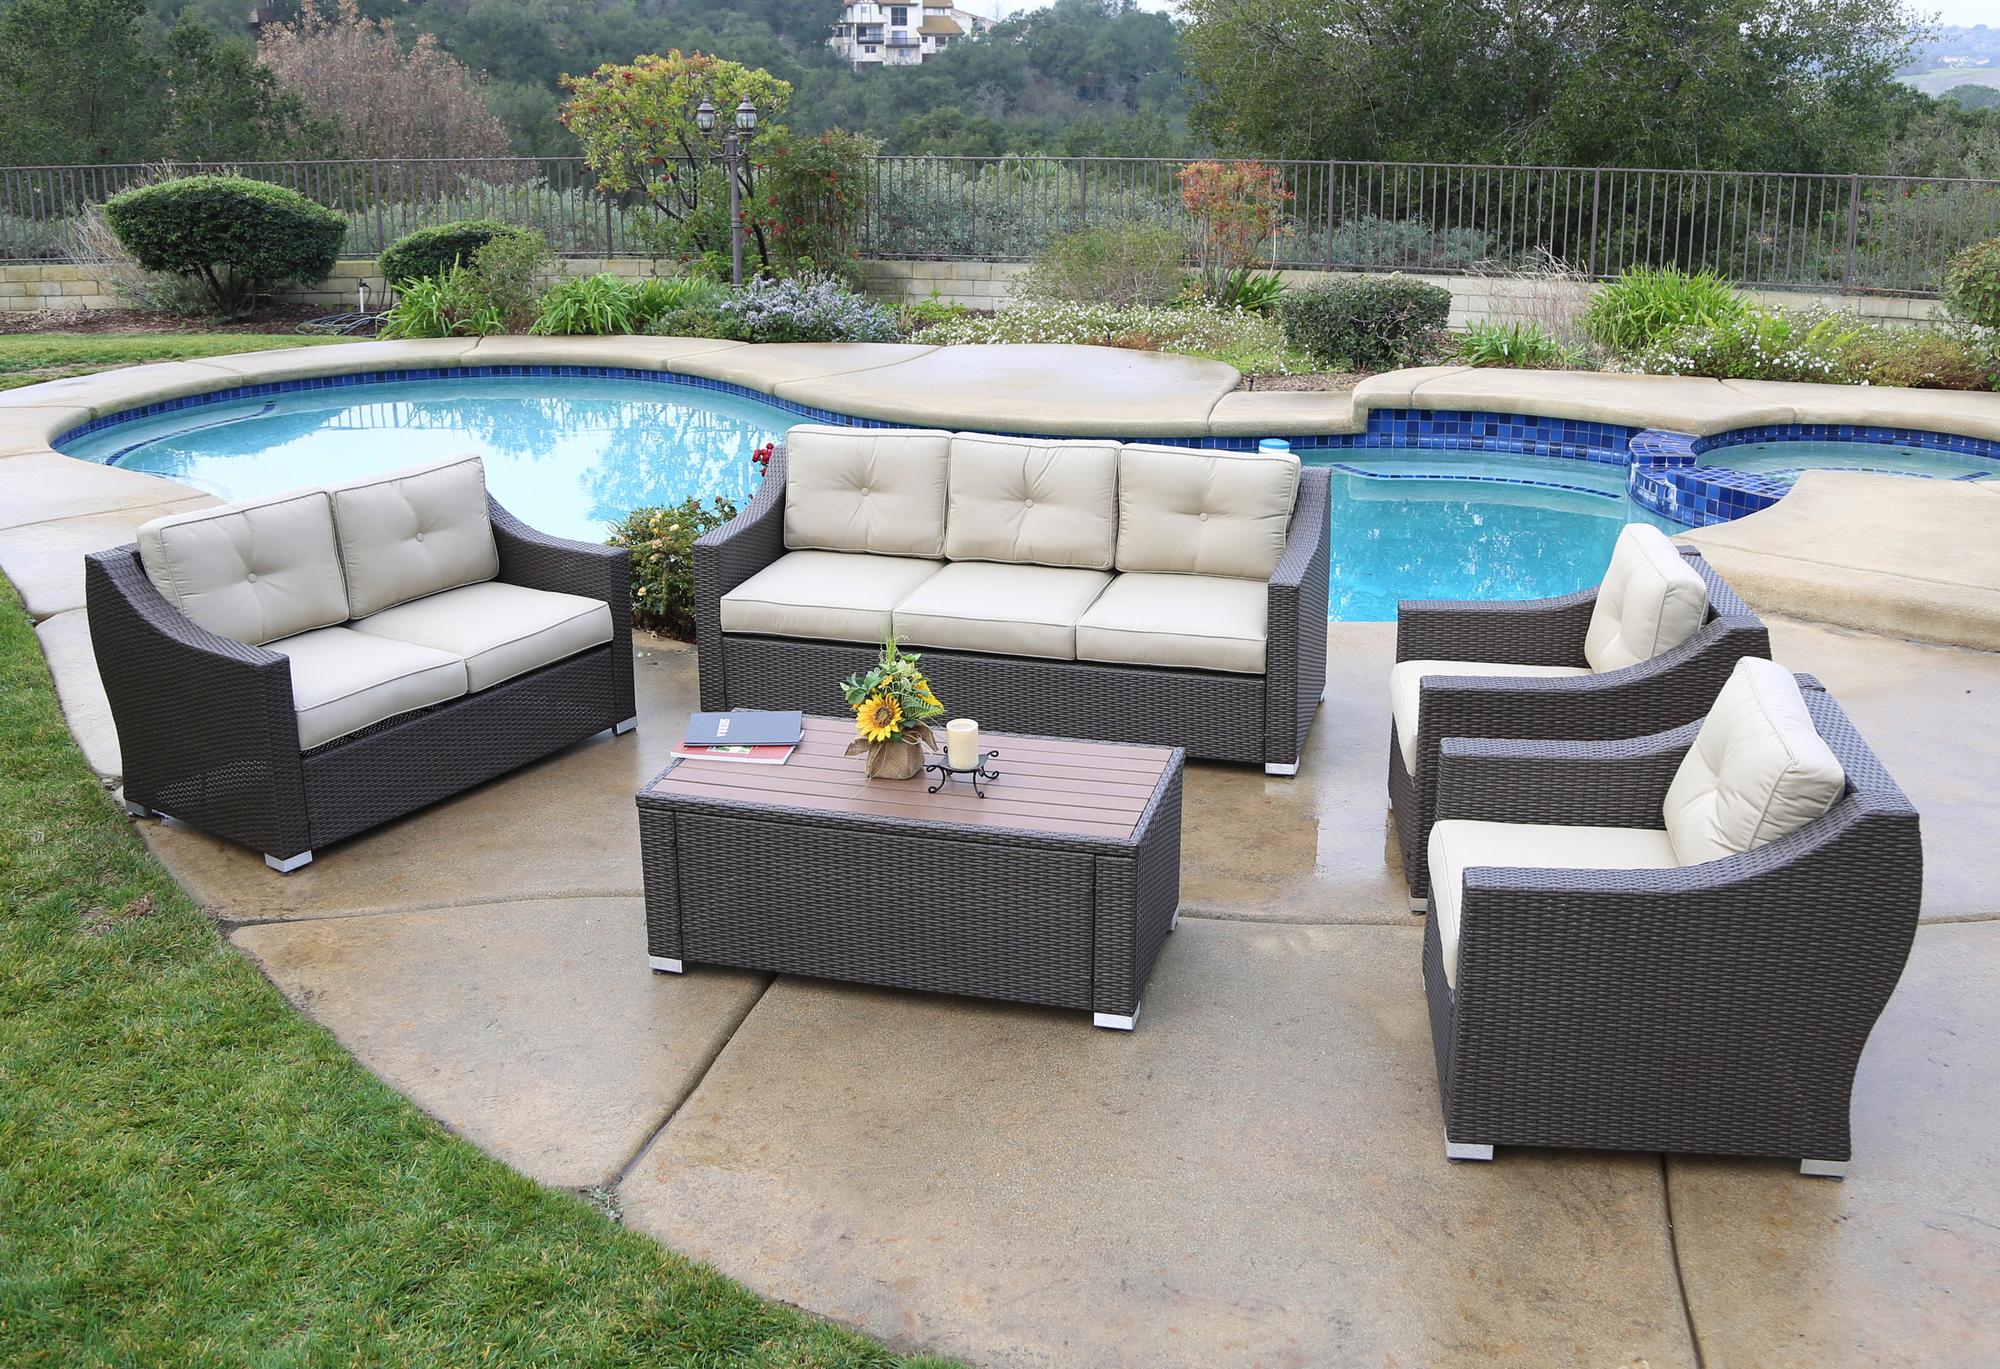 5 Piece South Beach Wicker Patio Deep Seating Group With Cushion